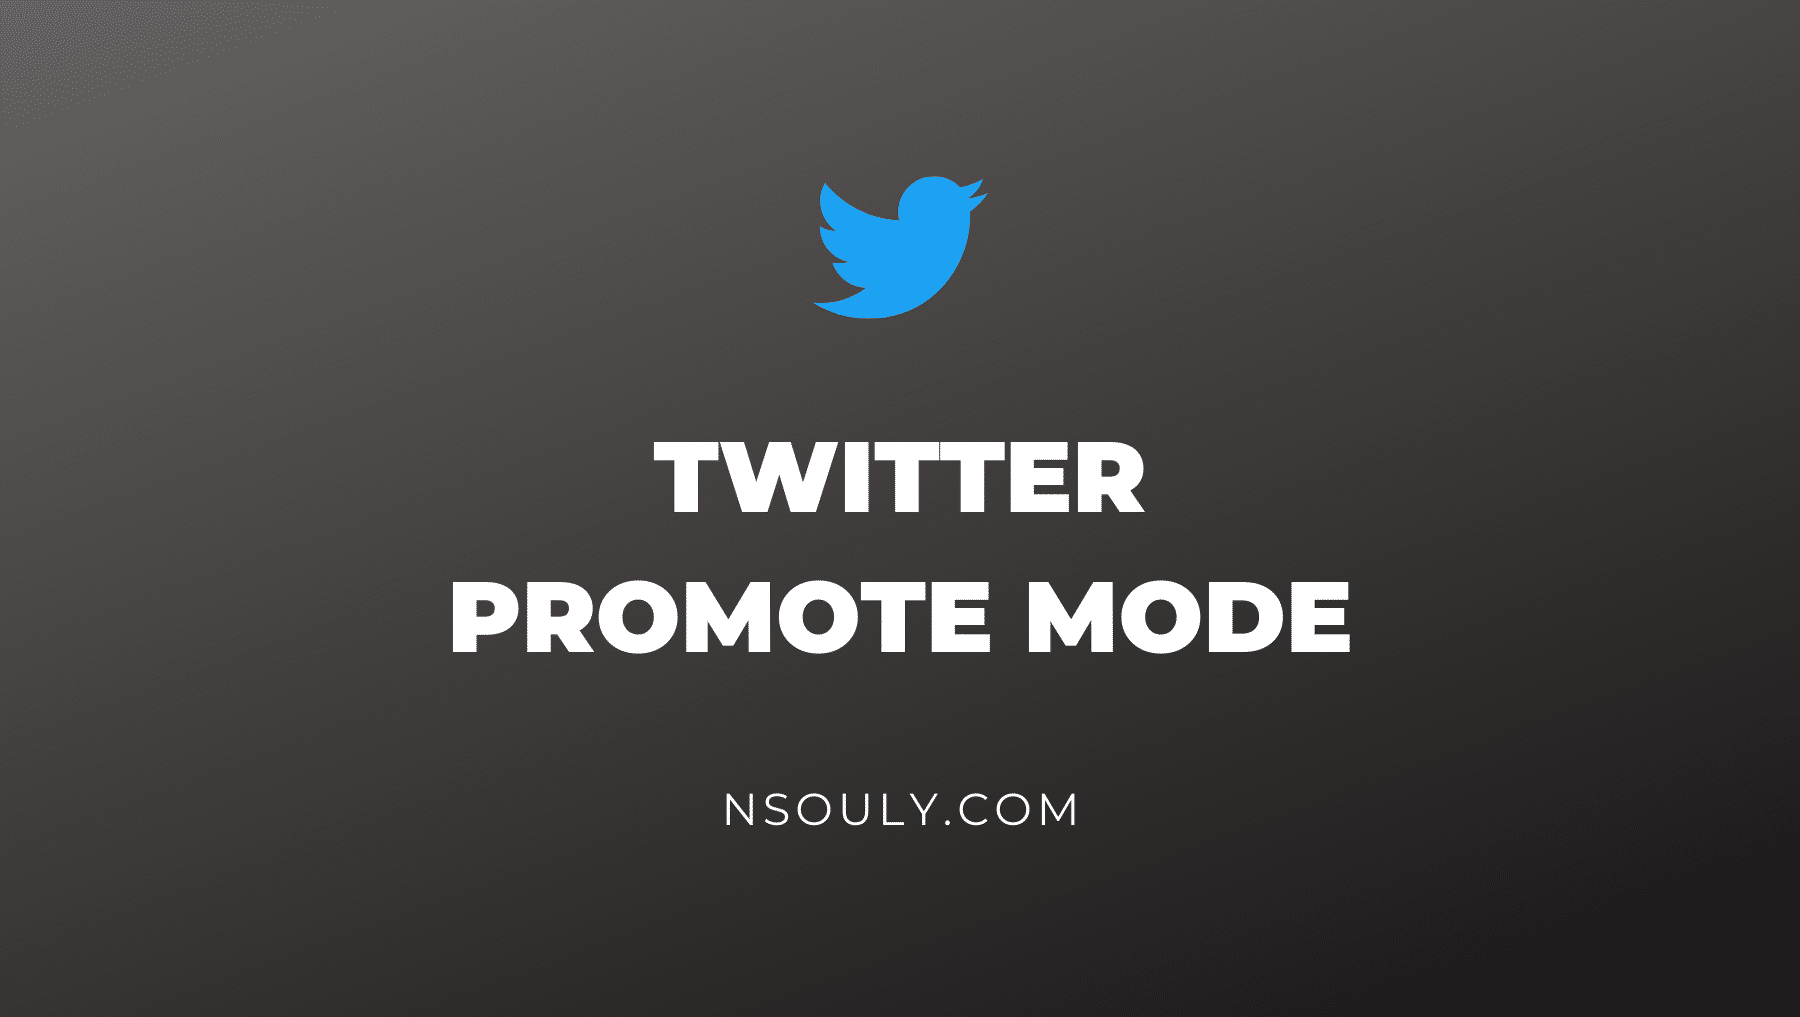 Twitter Promote Mode: The Pros and Cons and Should You Use it?